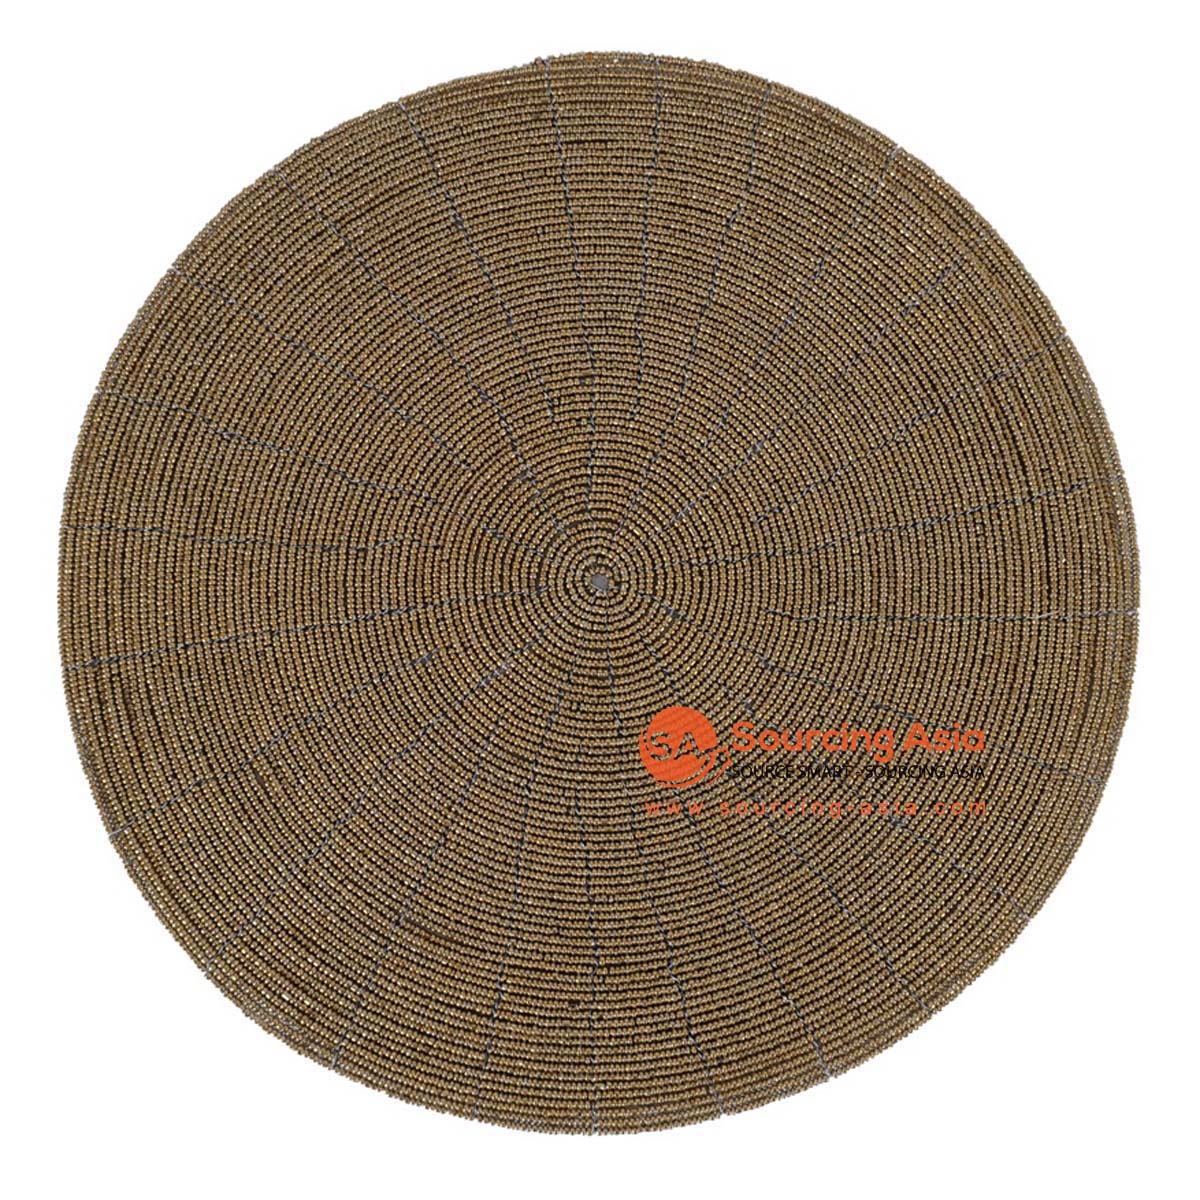 HBSC582-2 NATURAL BEADS ROUND PLACEMAT